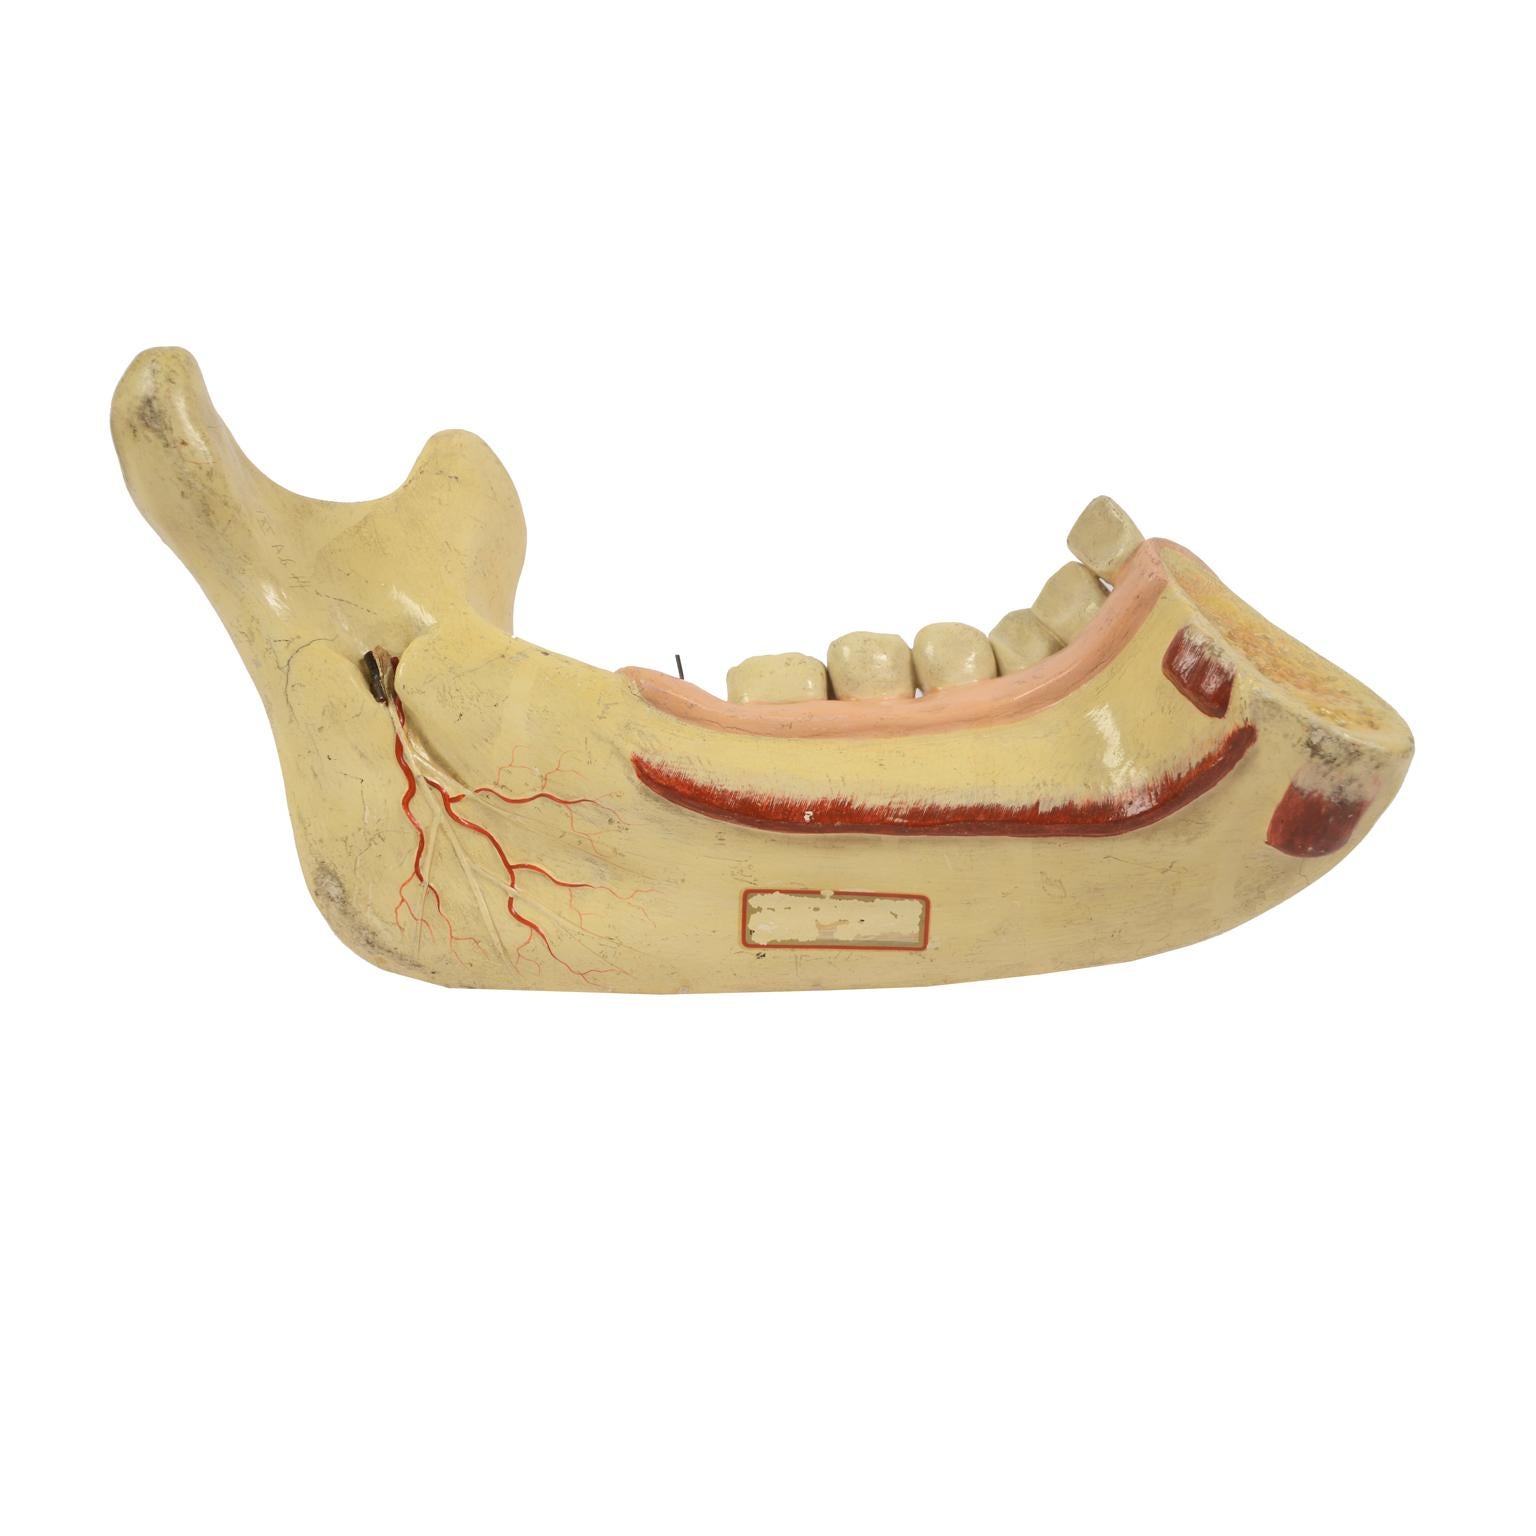 Late 19th Century 19th century Plaster Didactic Dentist Model of an Enlarged Mandible, Germany